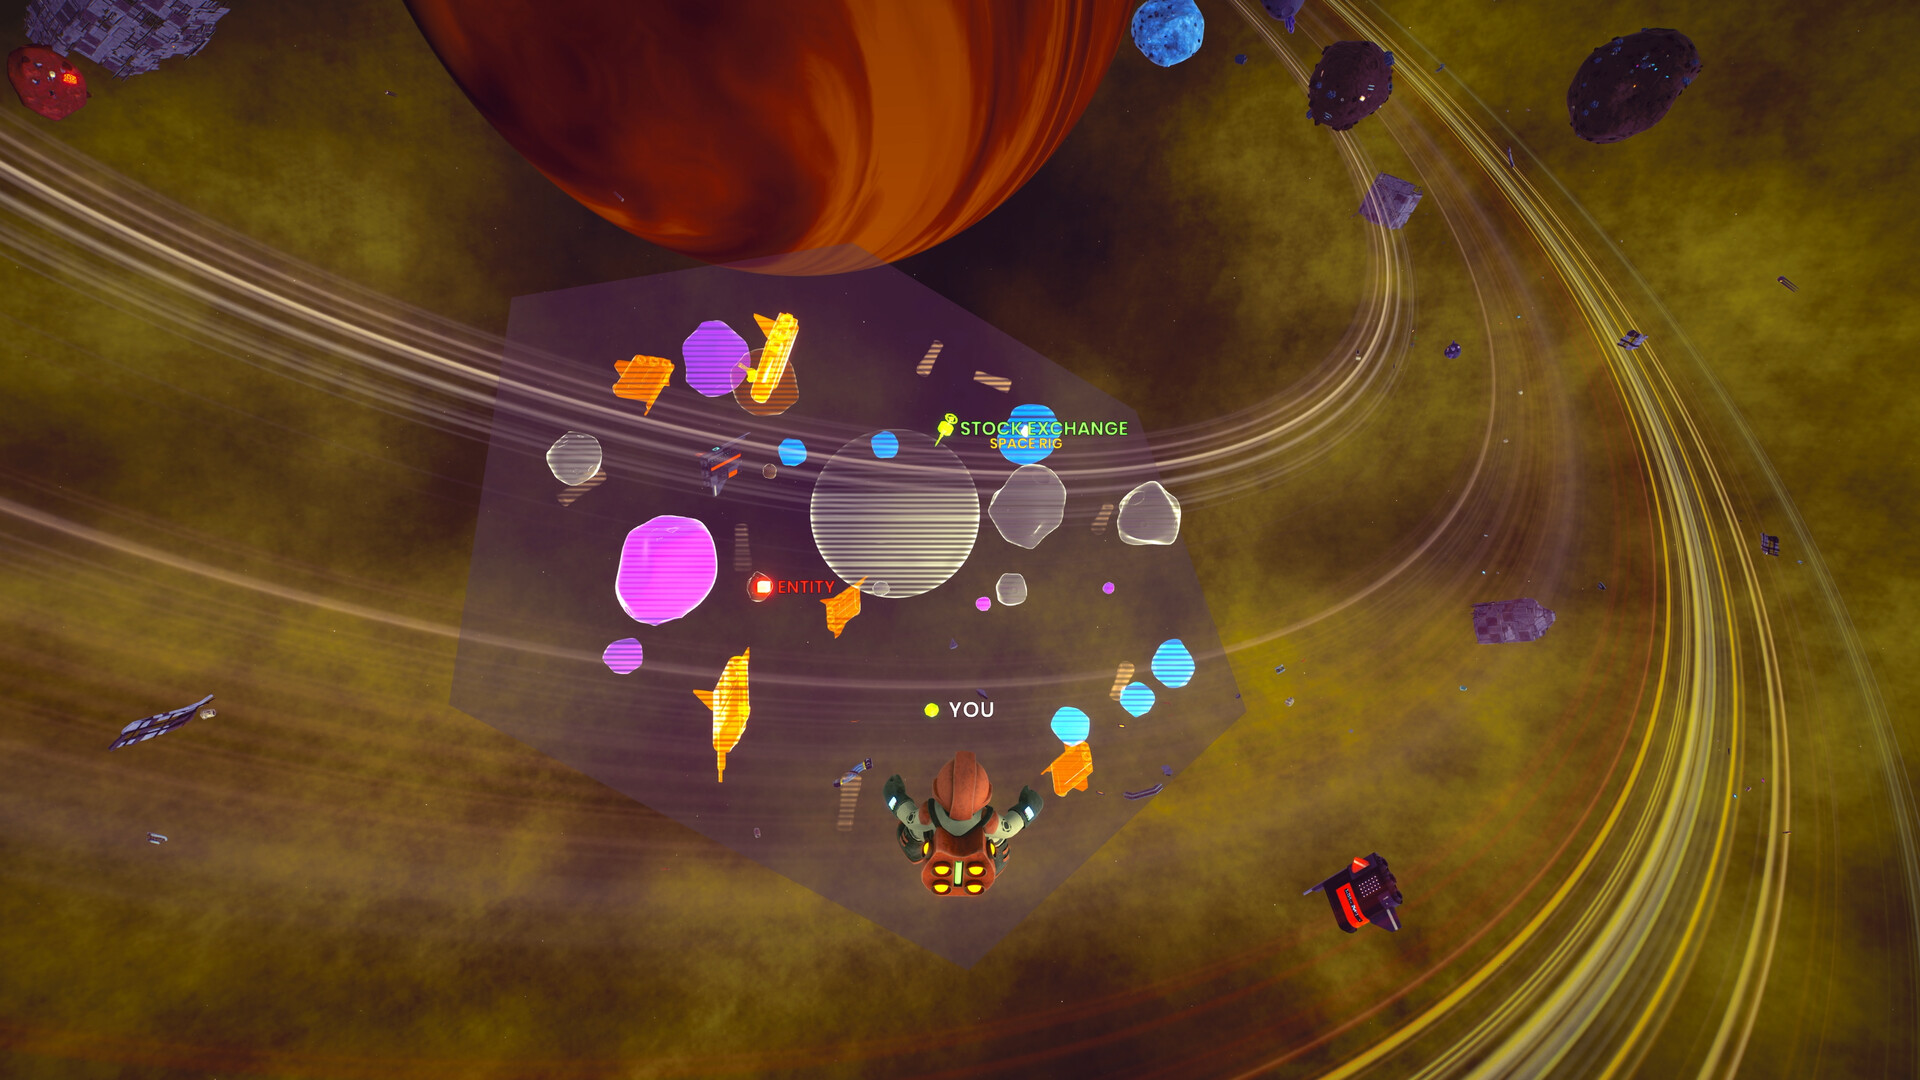 Screenshot of colorful astronaut and environment from Space Trash Scavenger